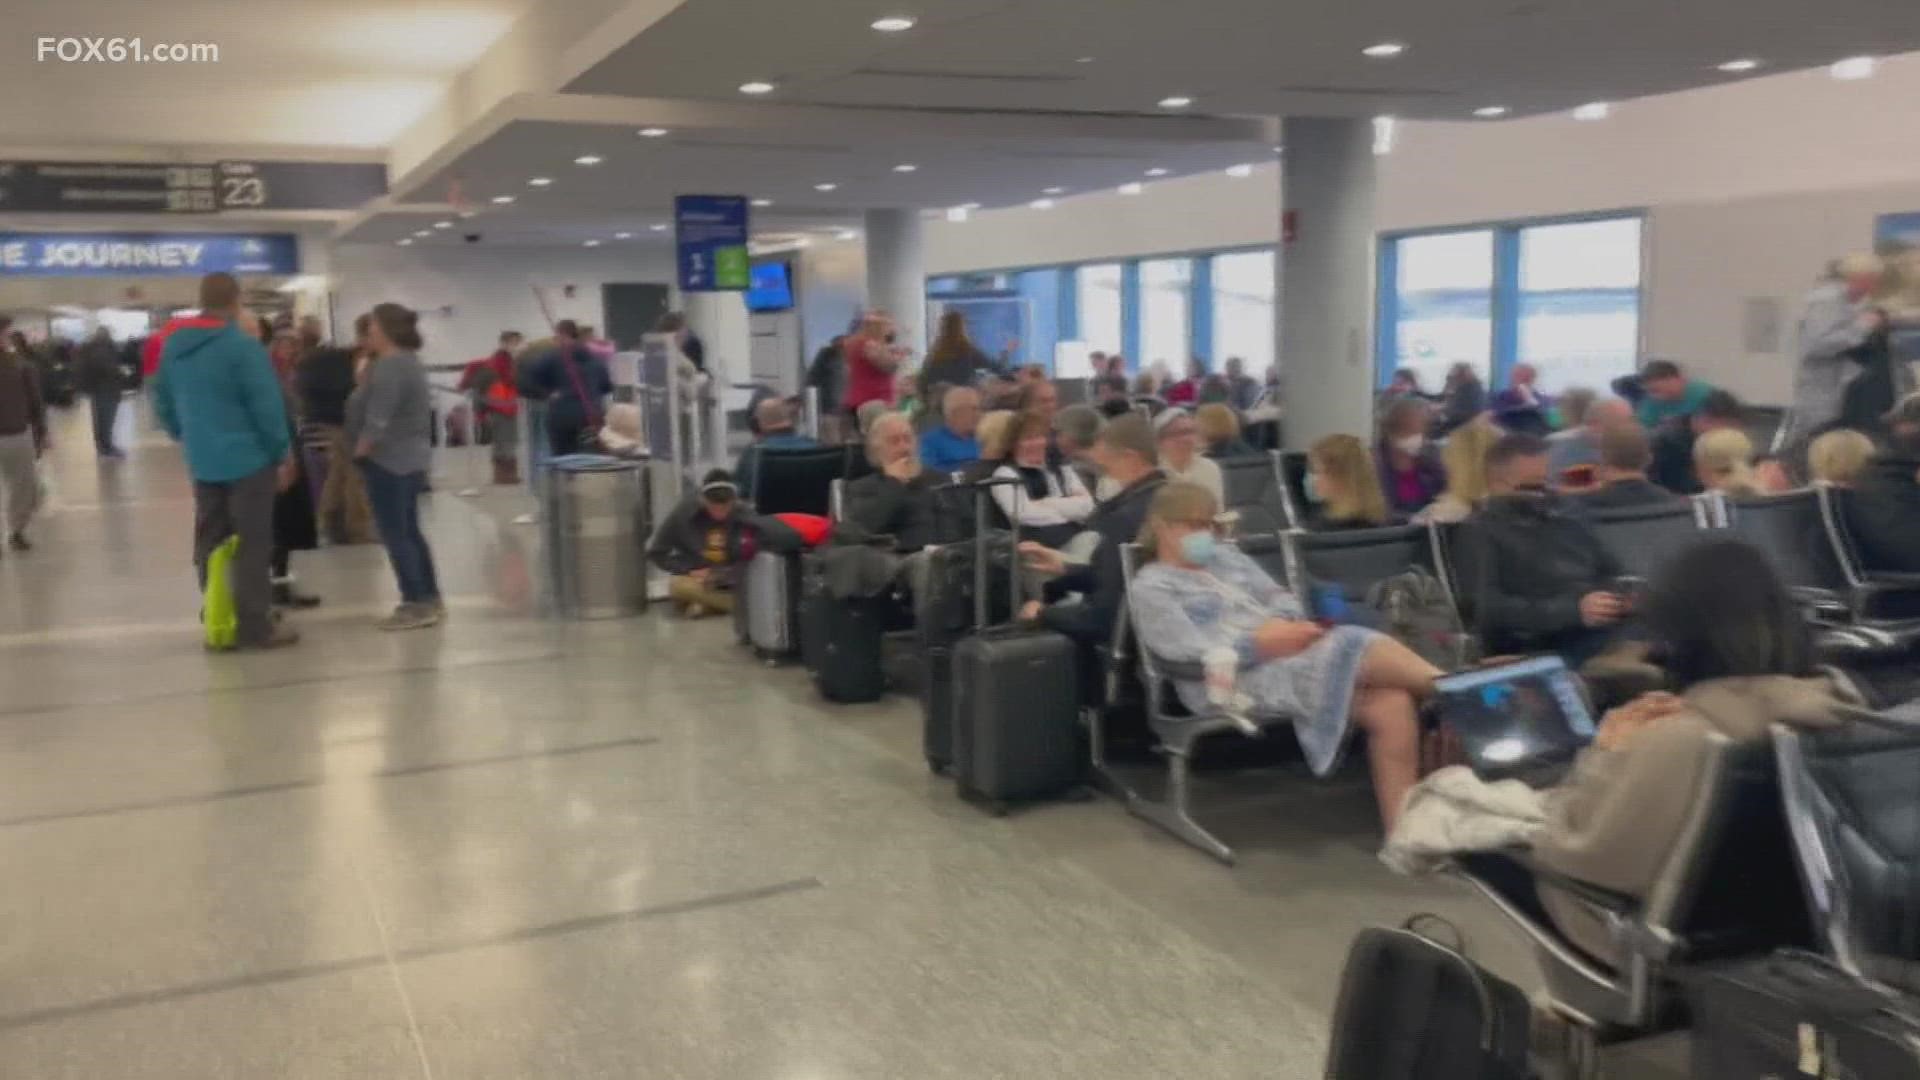 FAA said flights may resume after a nationwide system outage. The agency ordered all domestic flights to pause until 9 a.m.